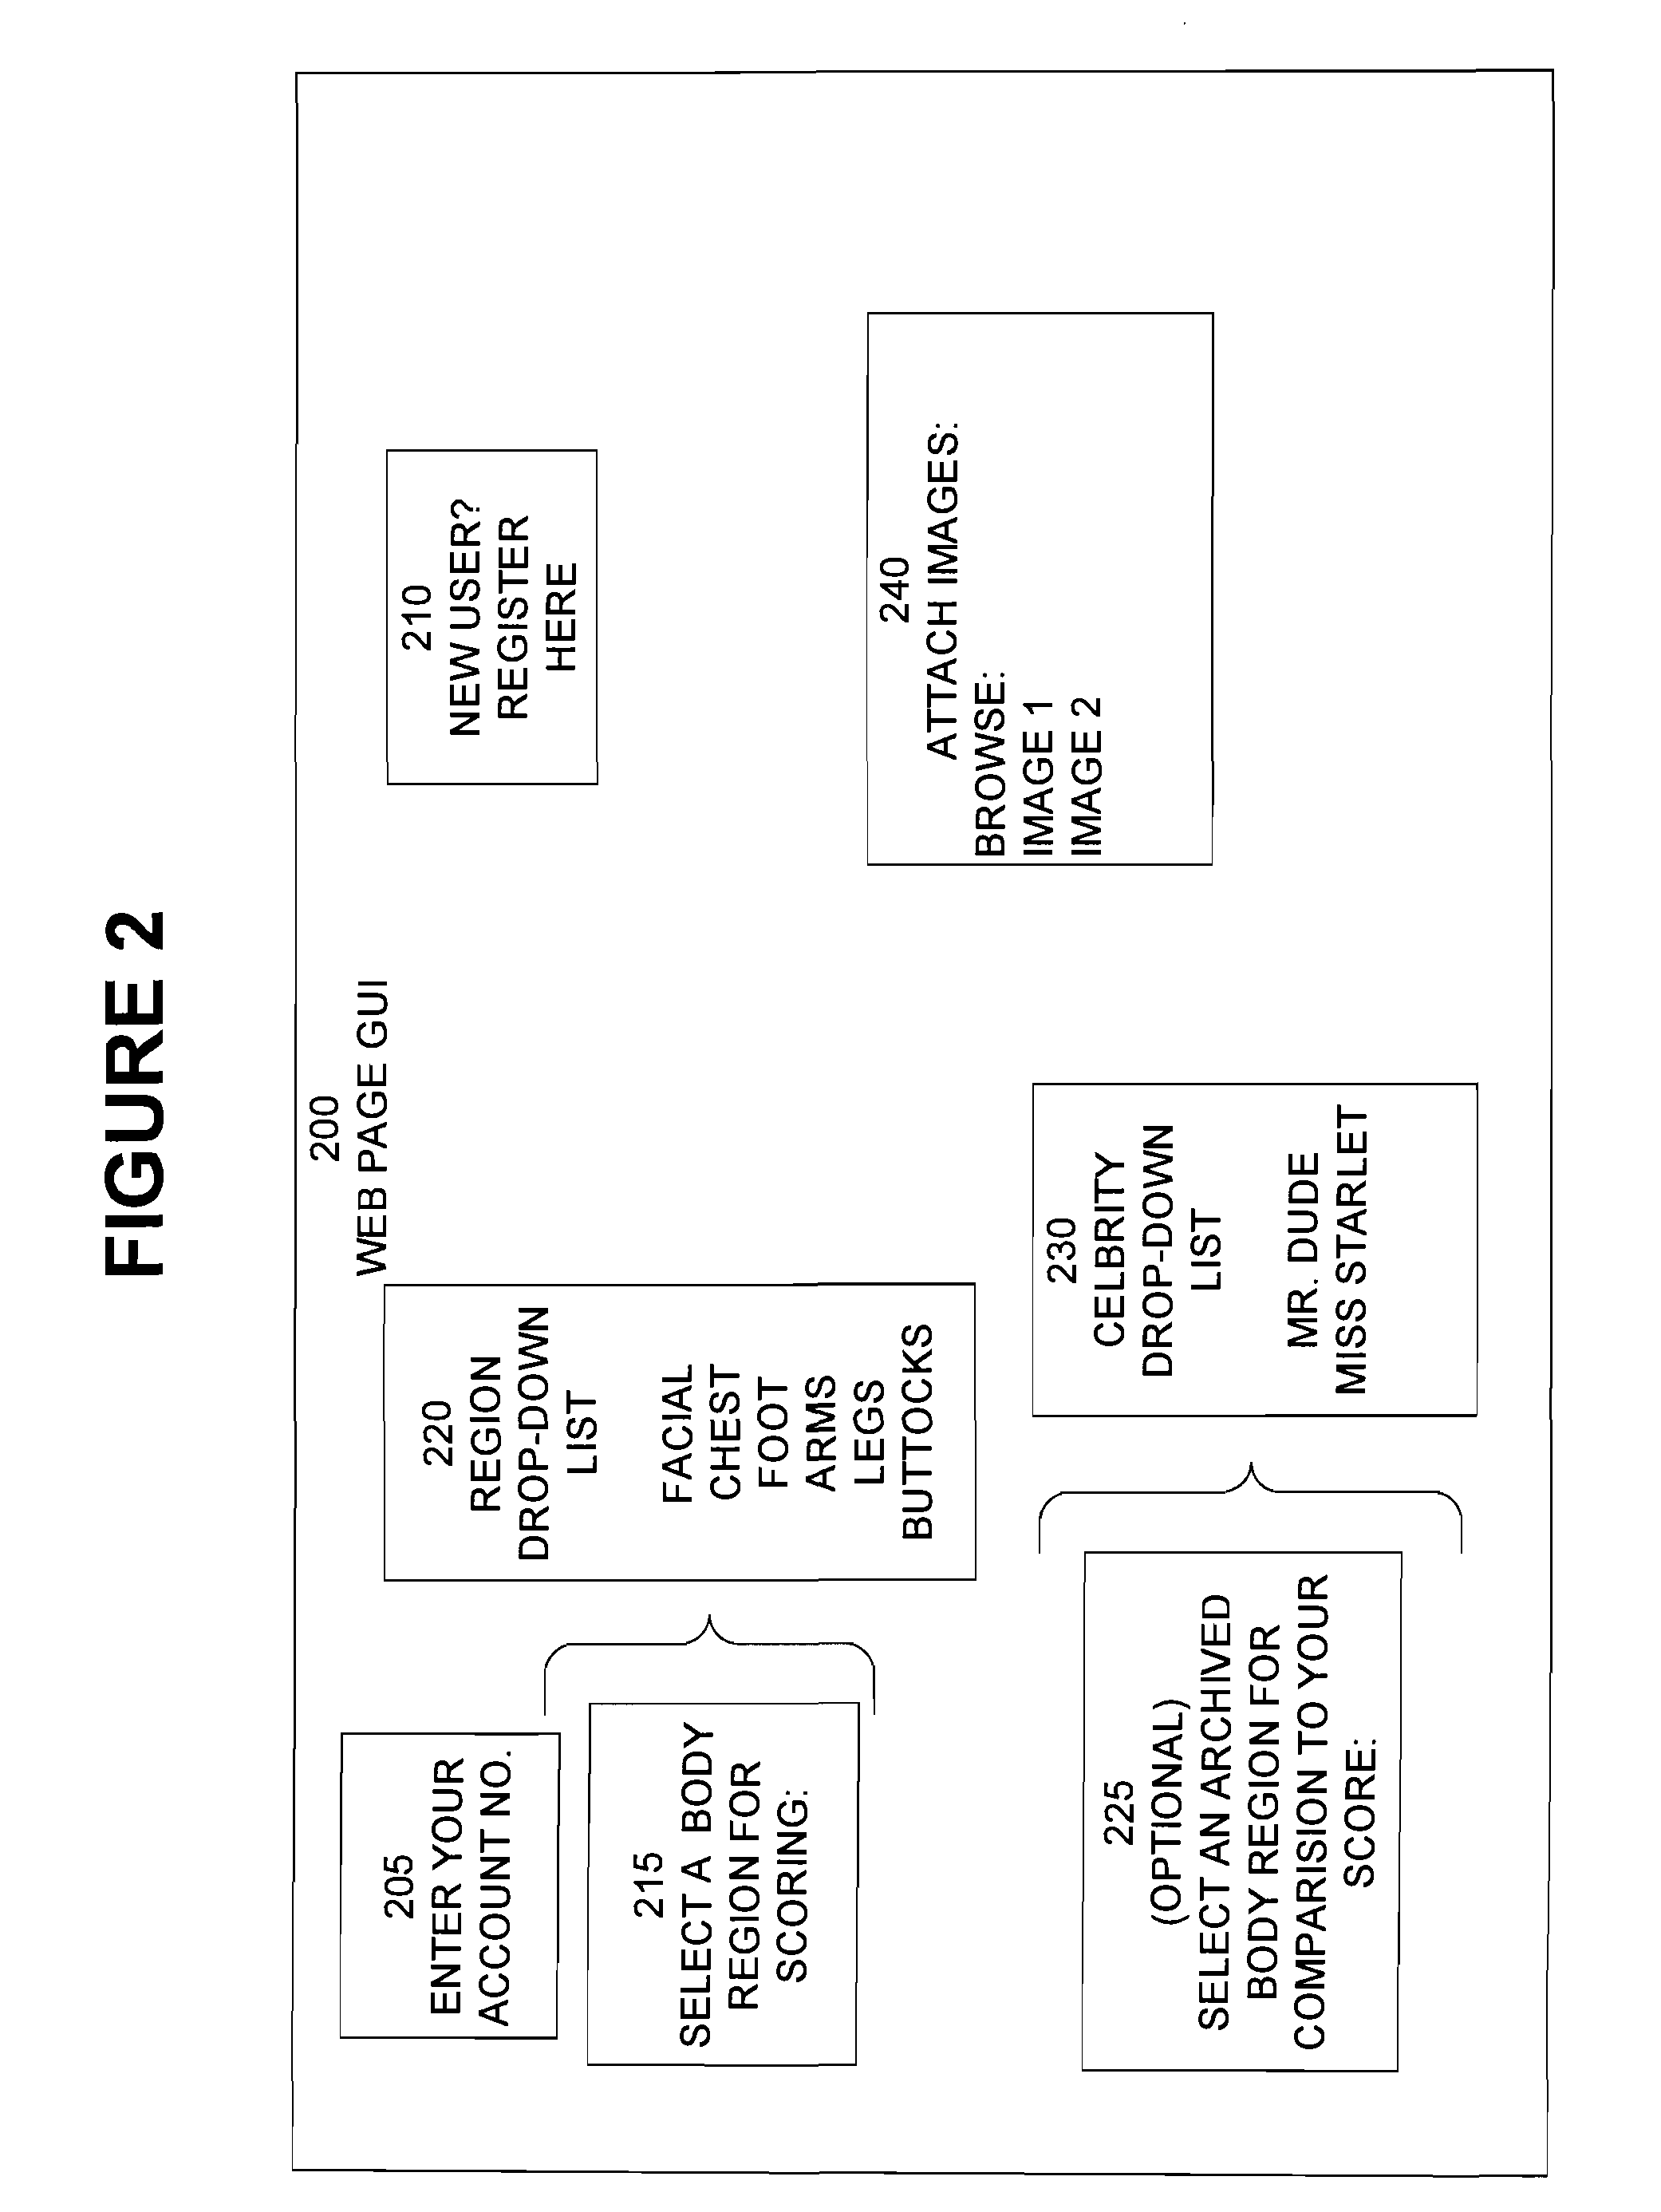 System and Method for Determining an Objective Measure of Human Beauty